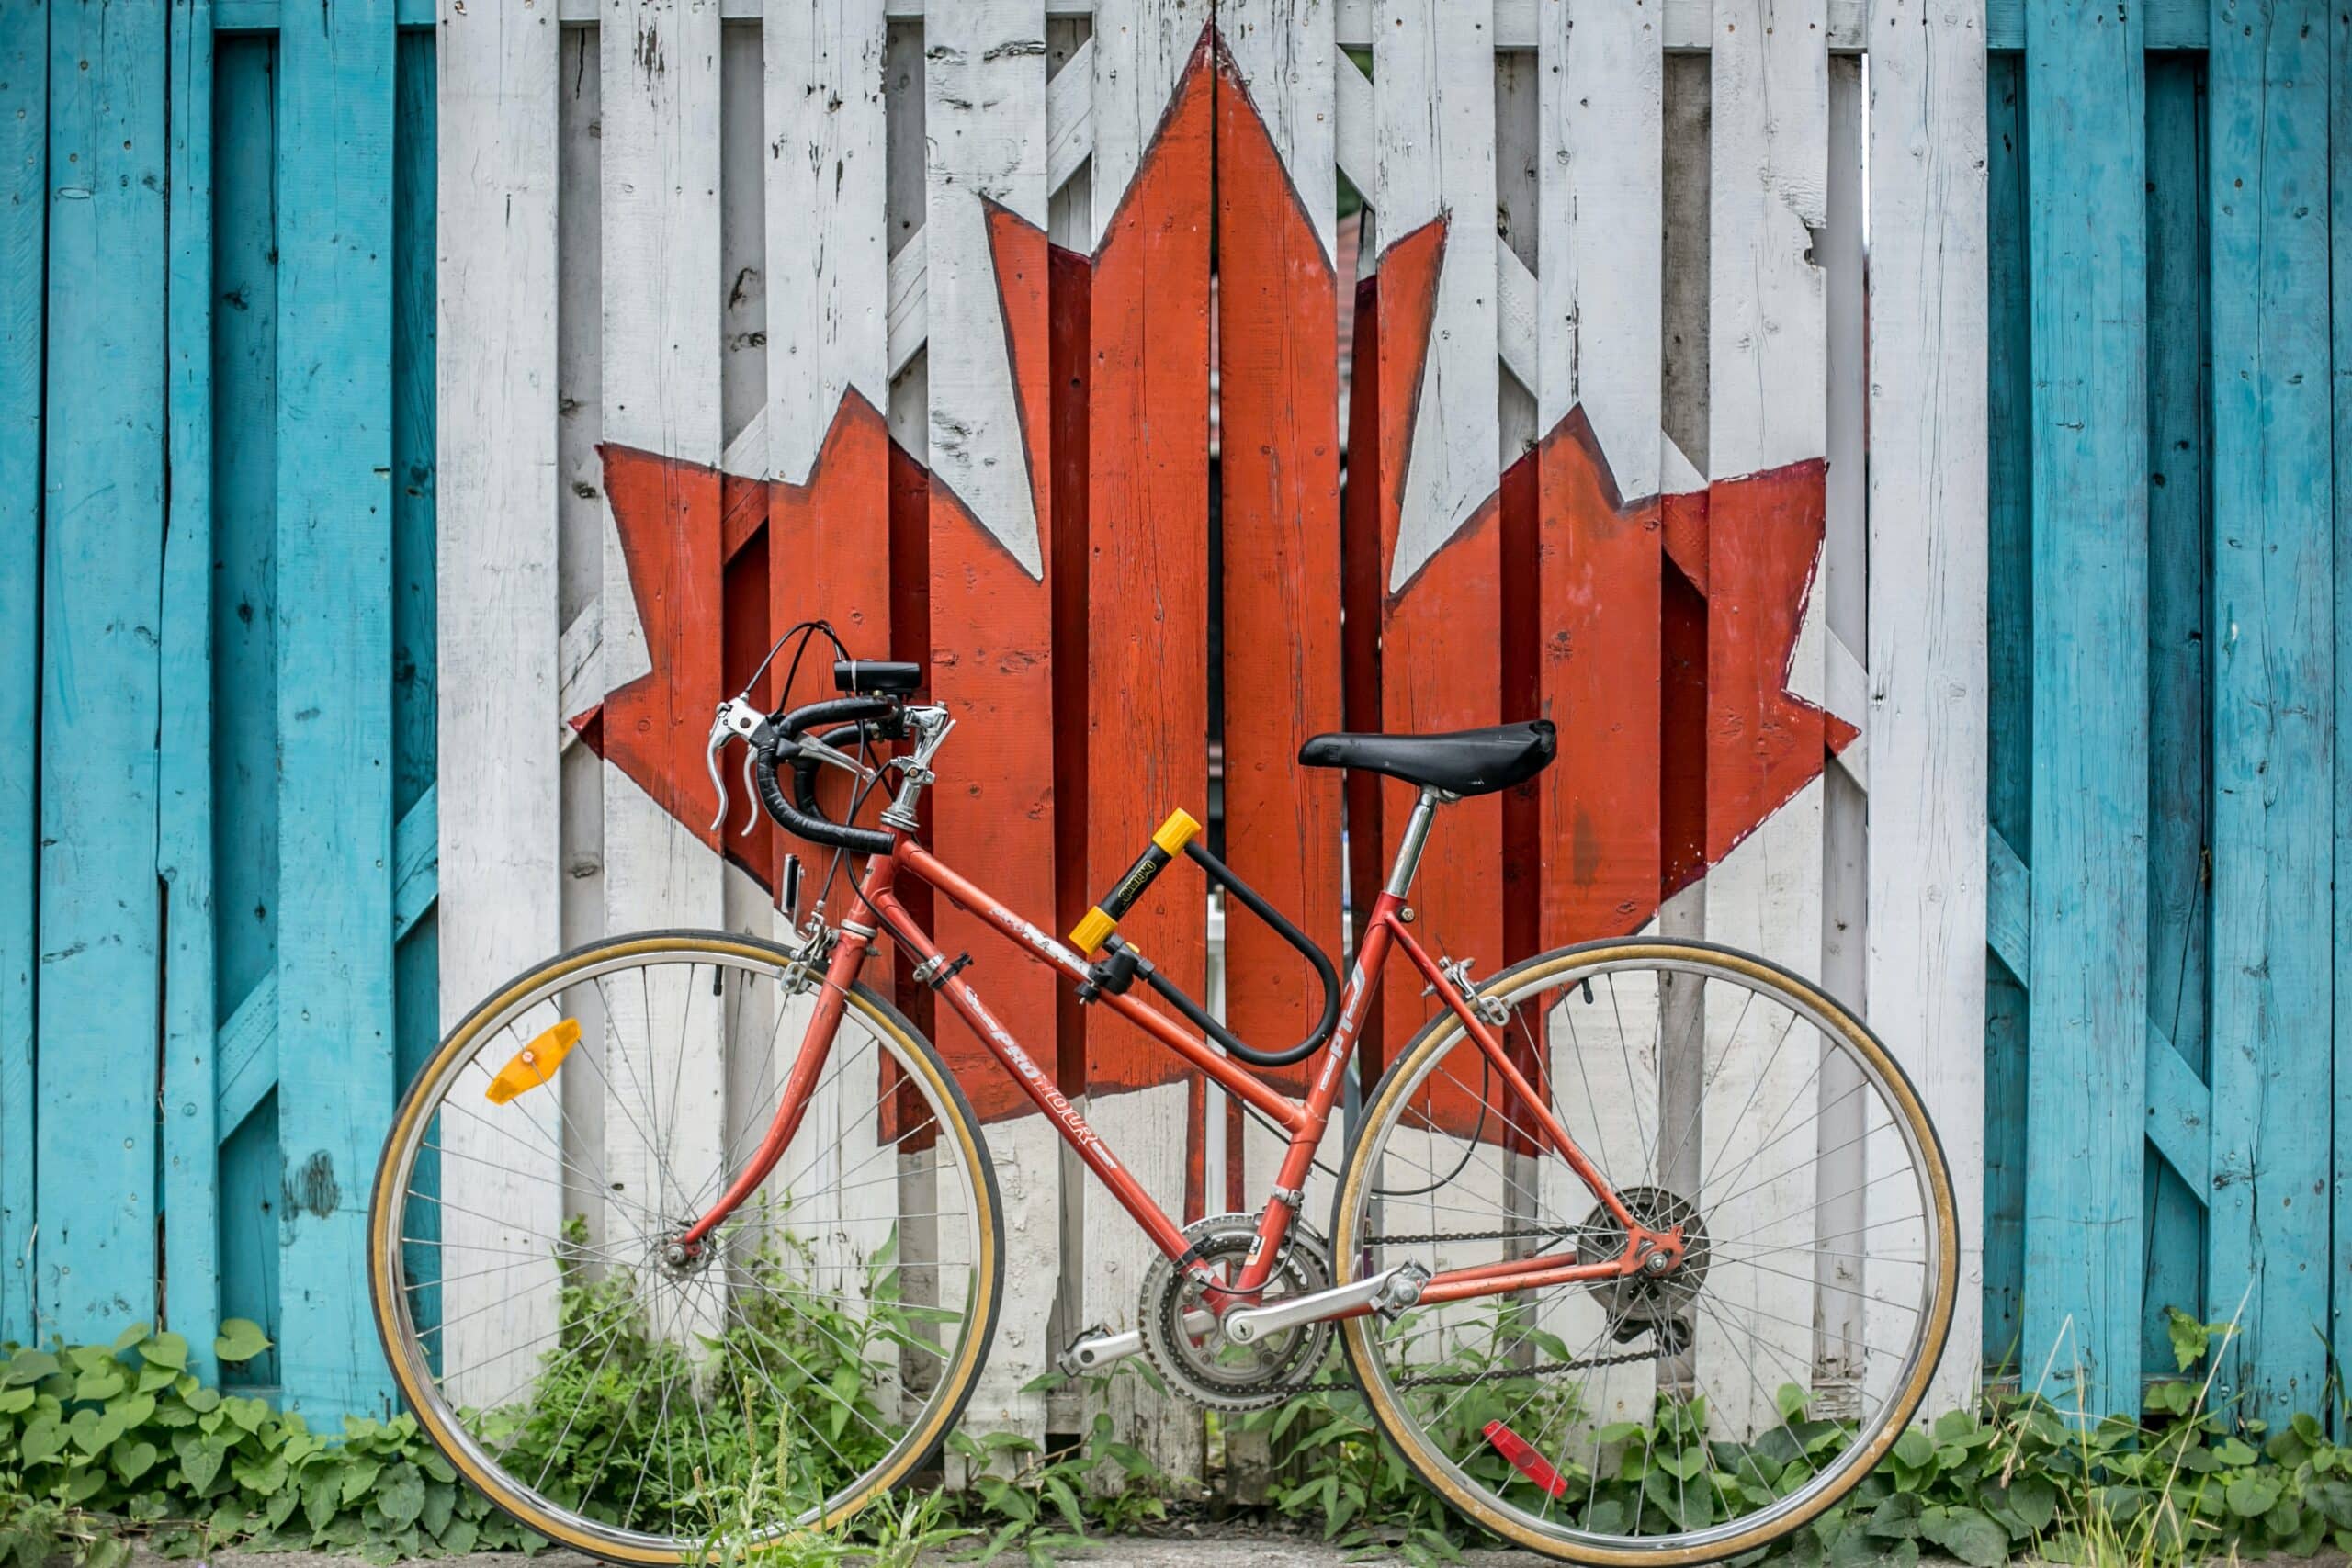 Bike with a red maple leaf representing medical or criminal in admissibility to Canada